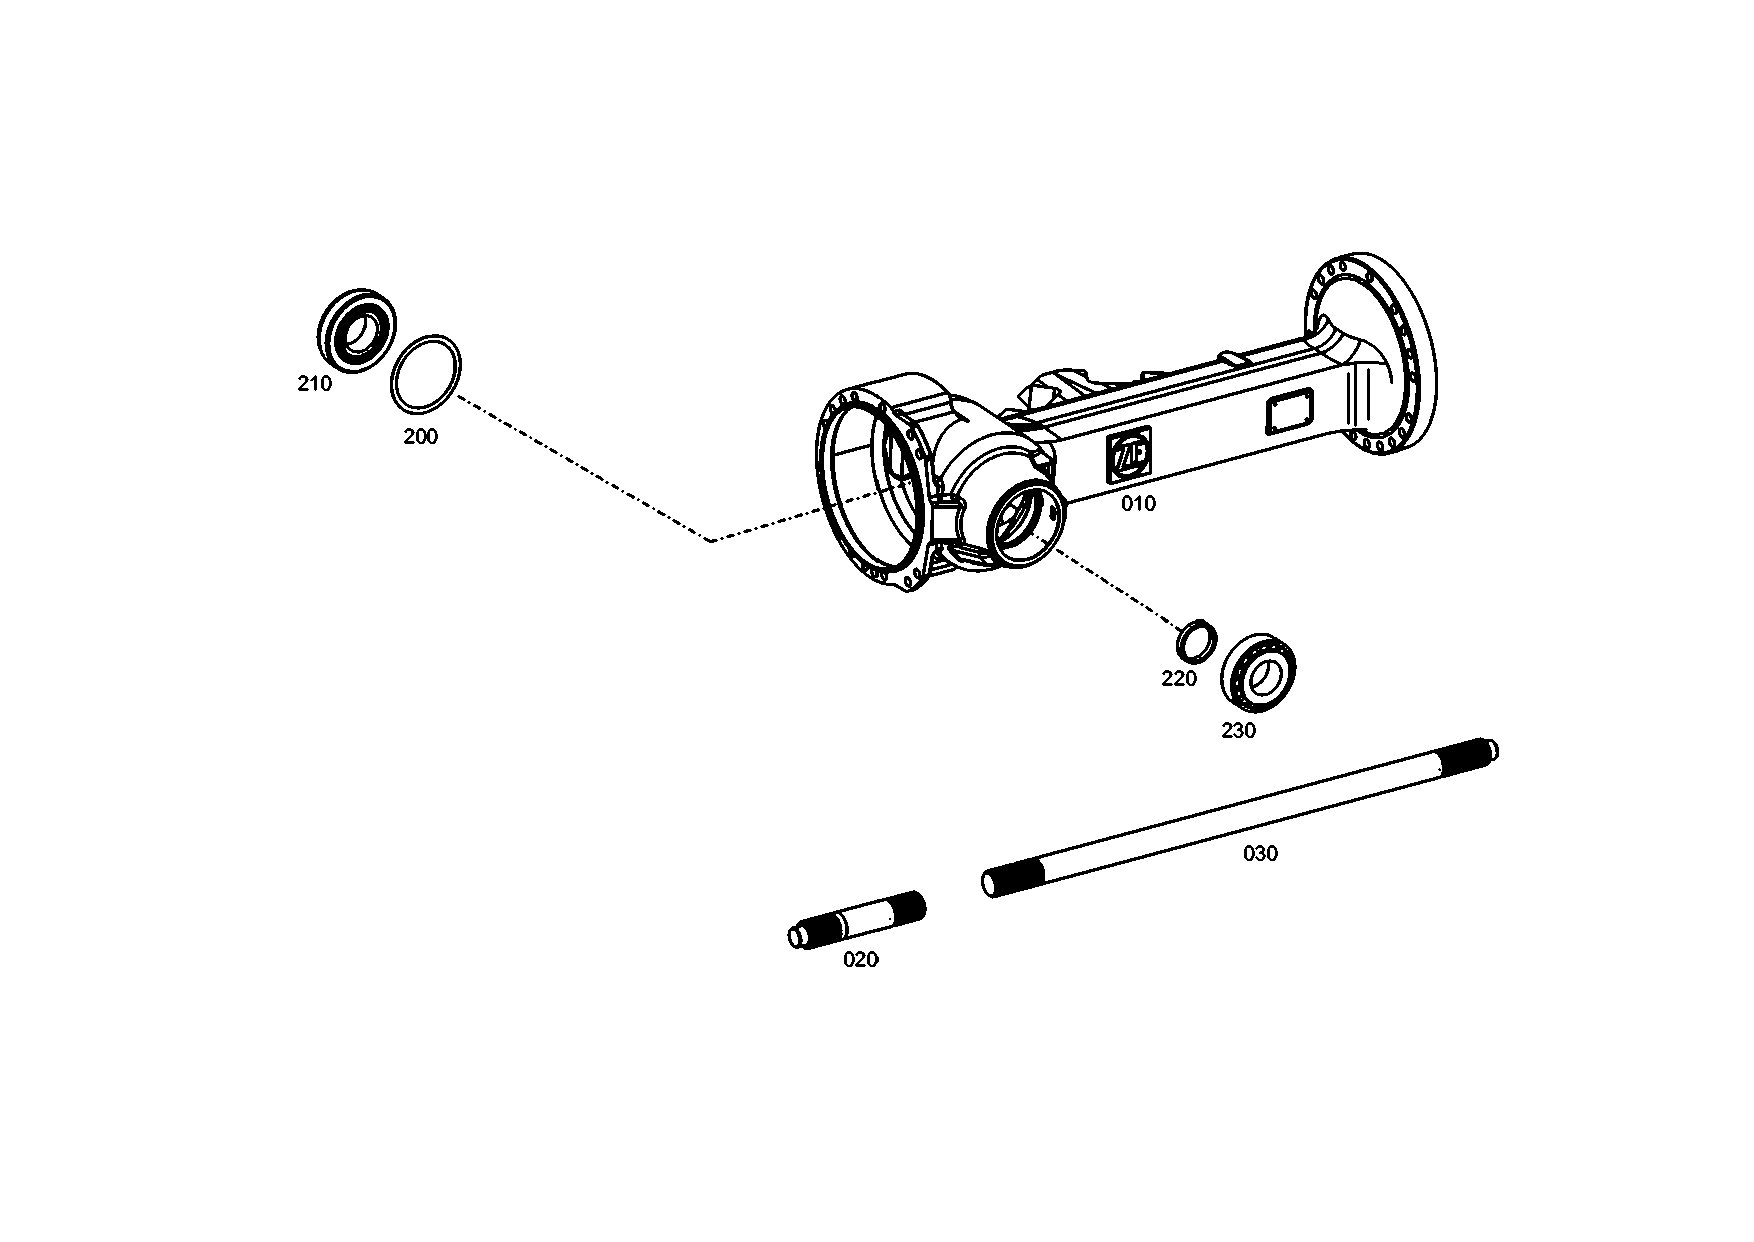 drawing for BUCHER FRANZ GMBH A0003510601 - AXLE CASING (figure 1)